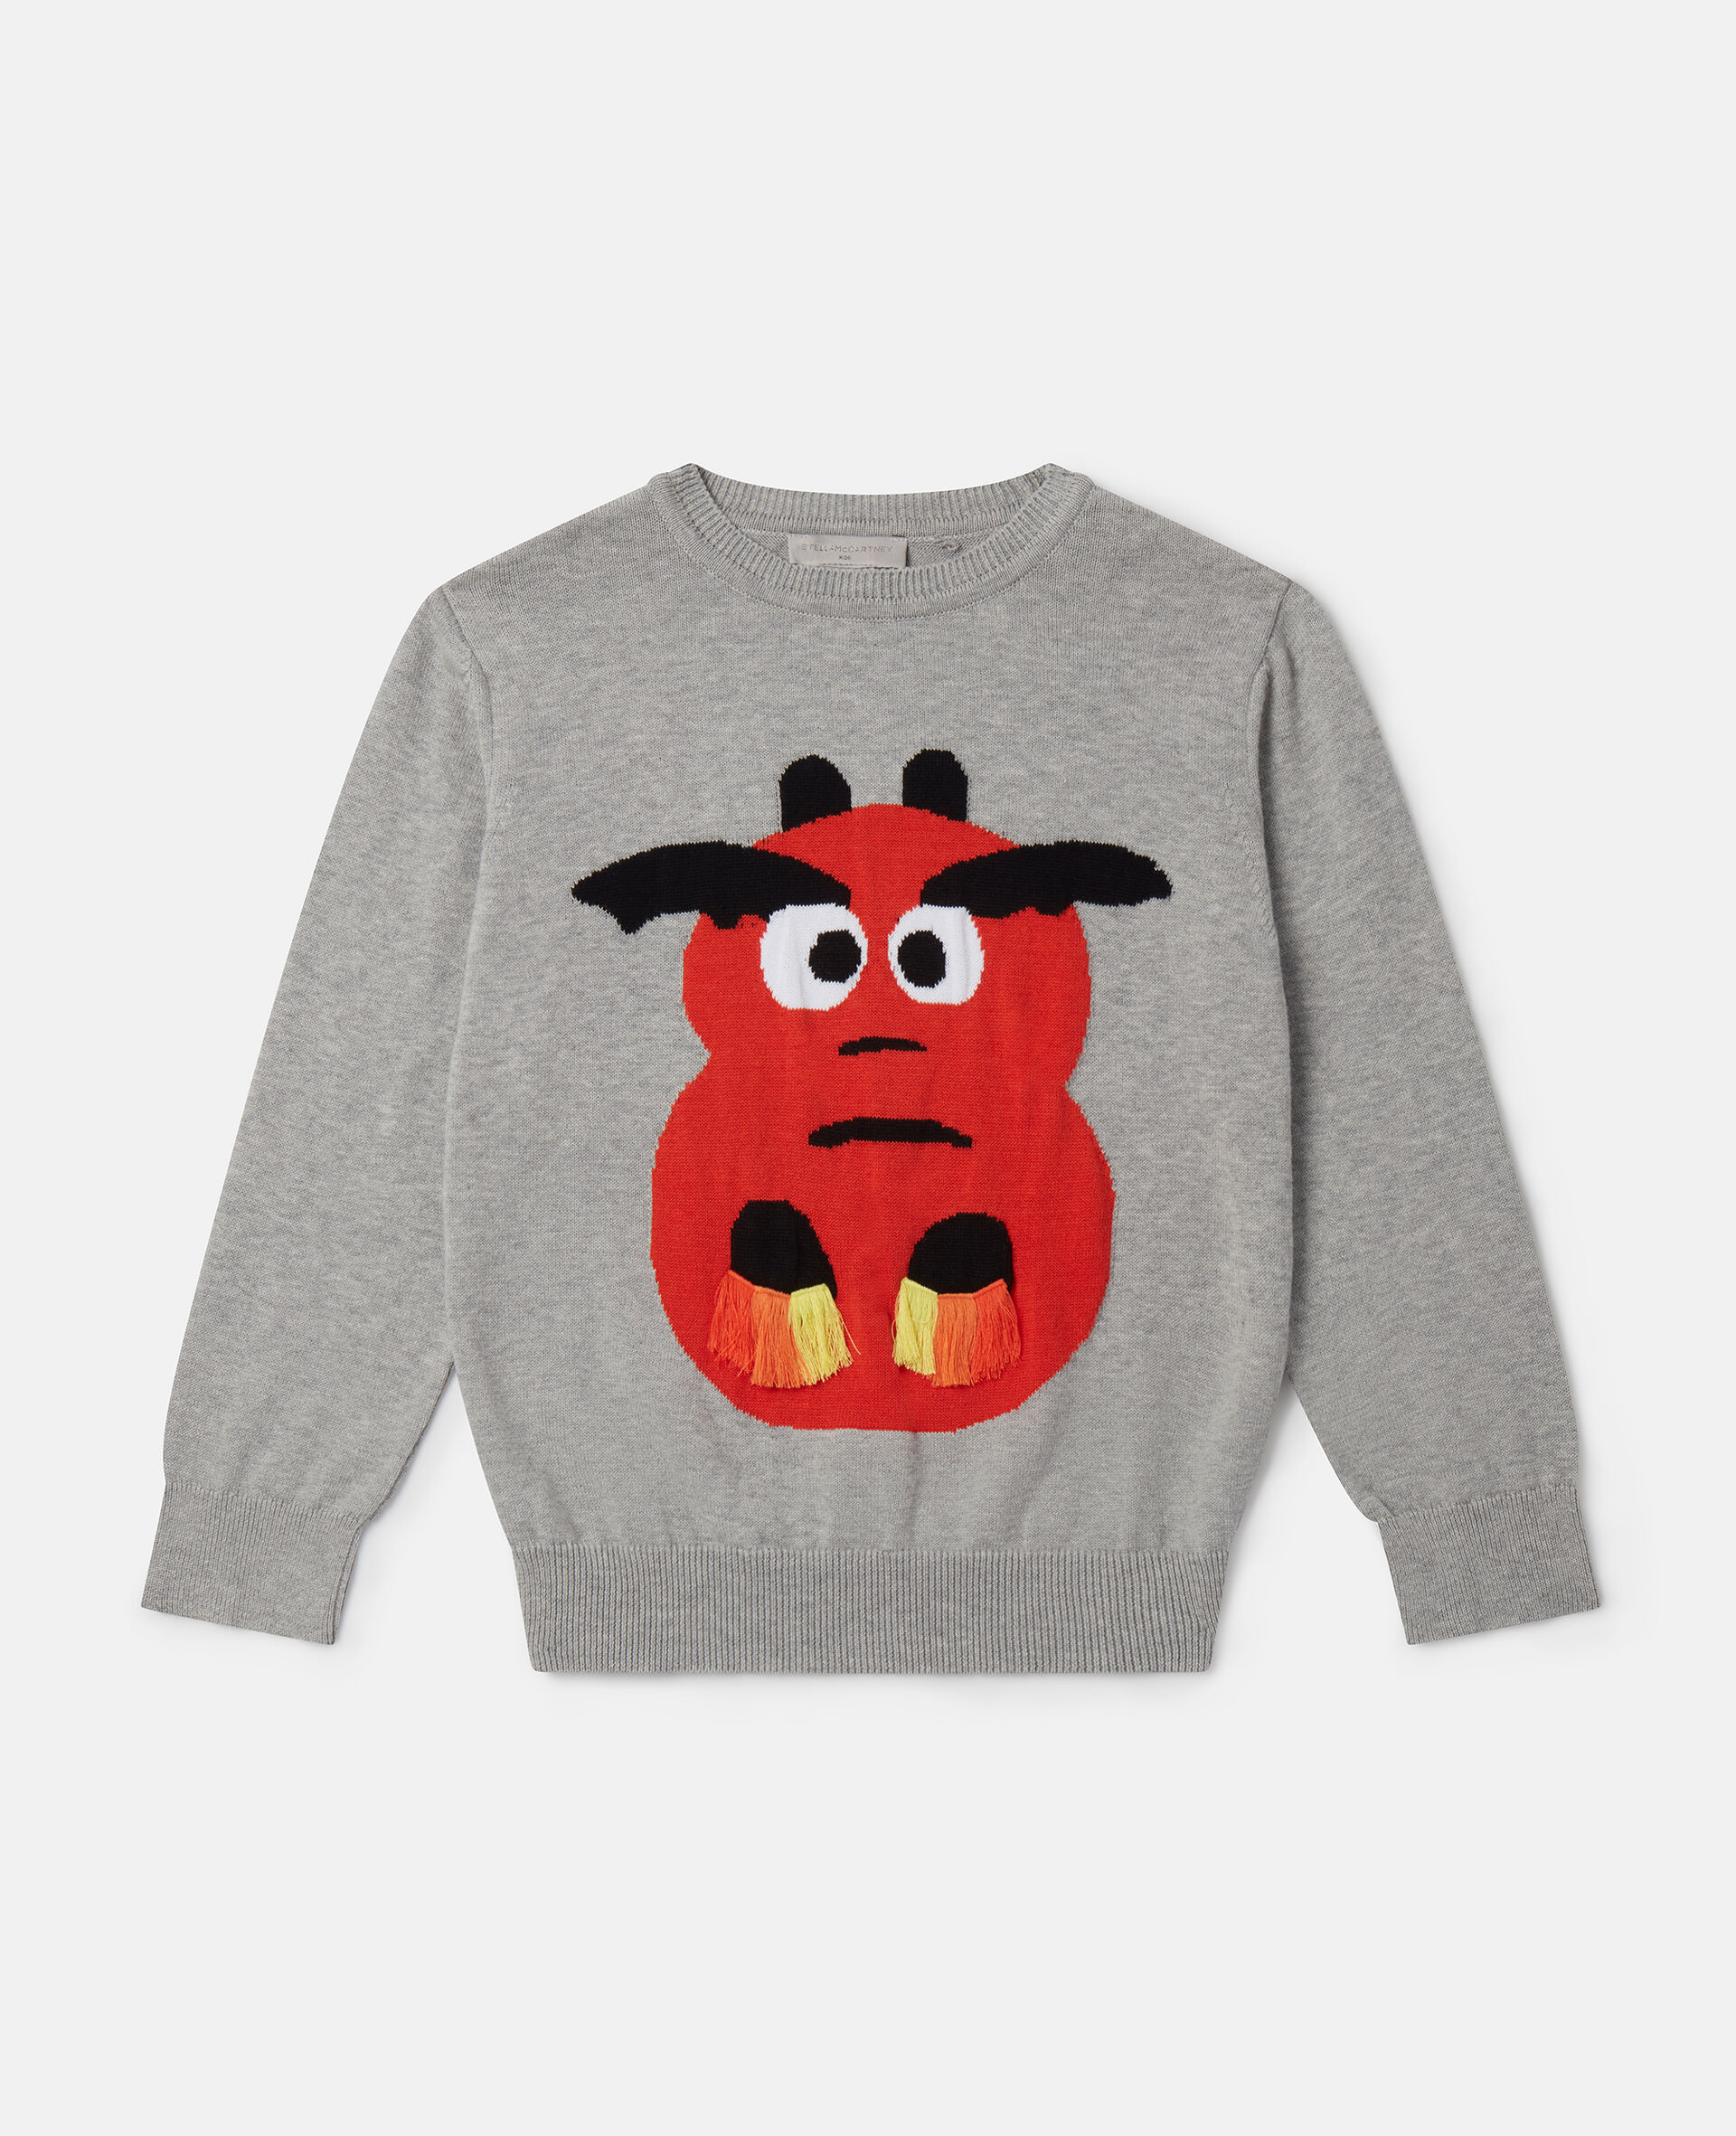 Year of the Dragon Jumper-Grey-large image number 0